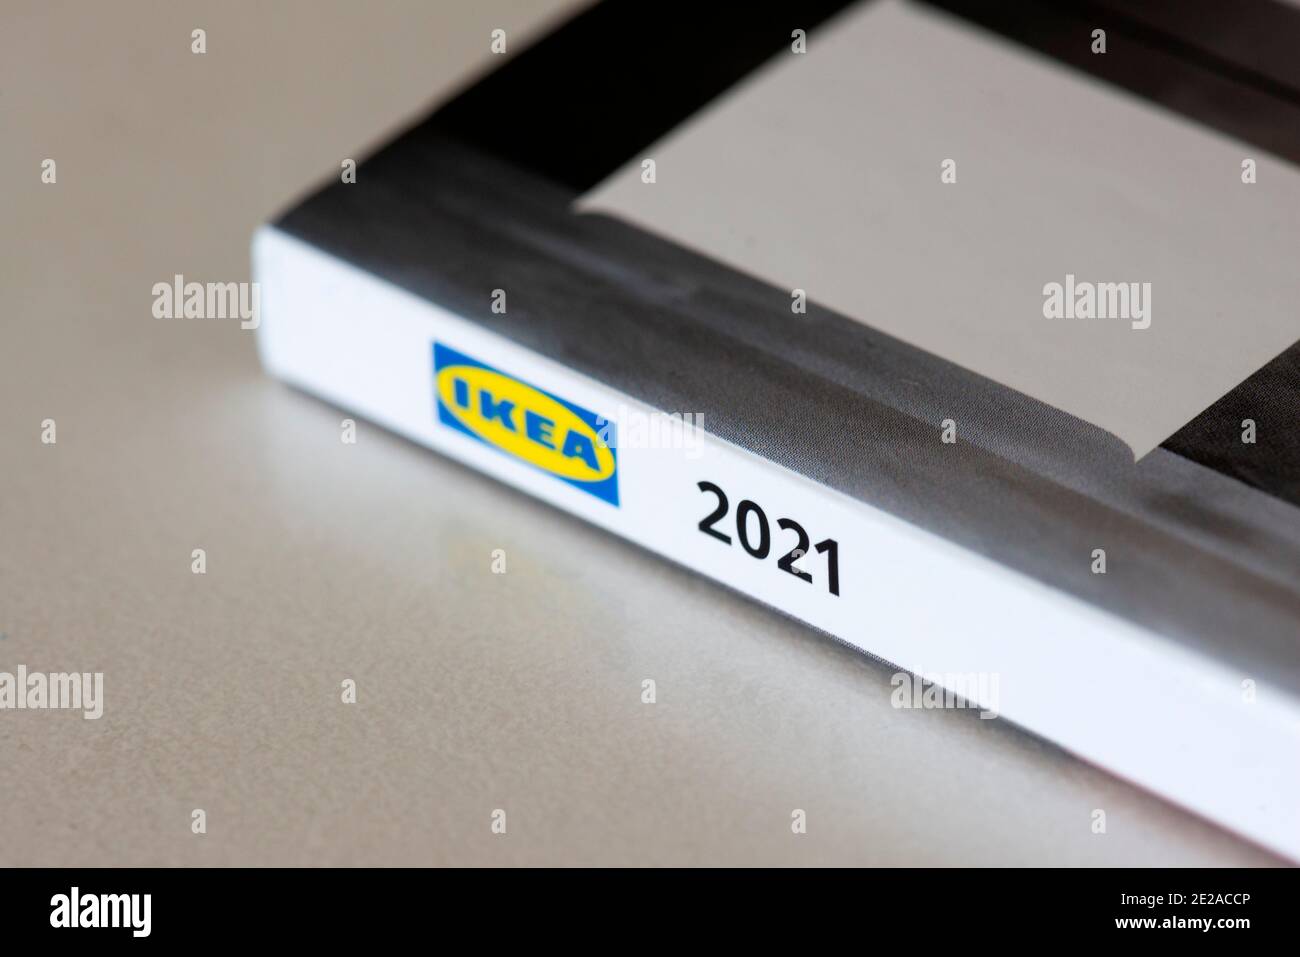 IKEA 2021 new edition paper catalogue as the last published printed version by the Swedish household and furniture retailer Stock Photo